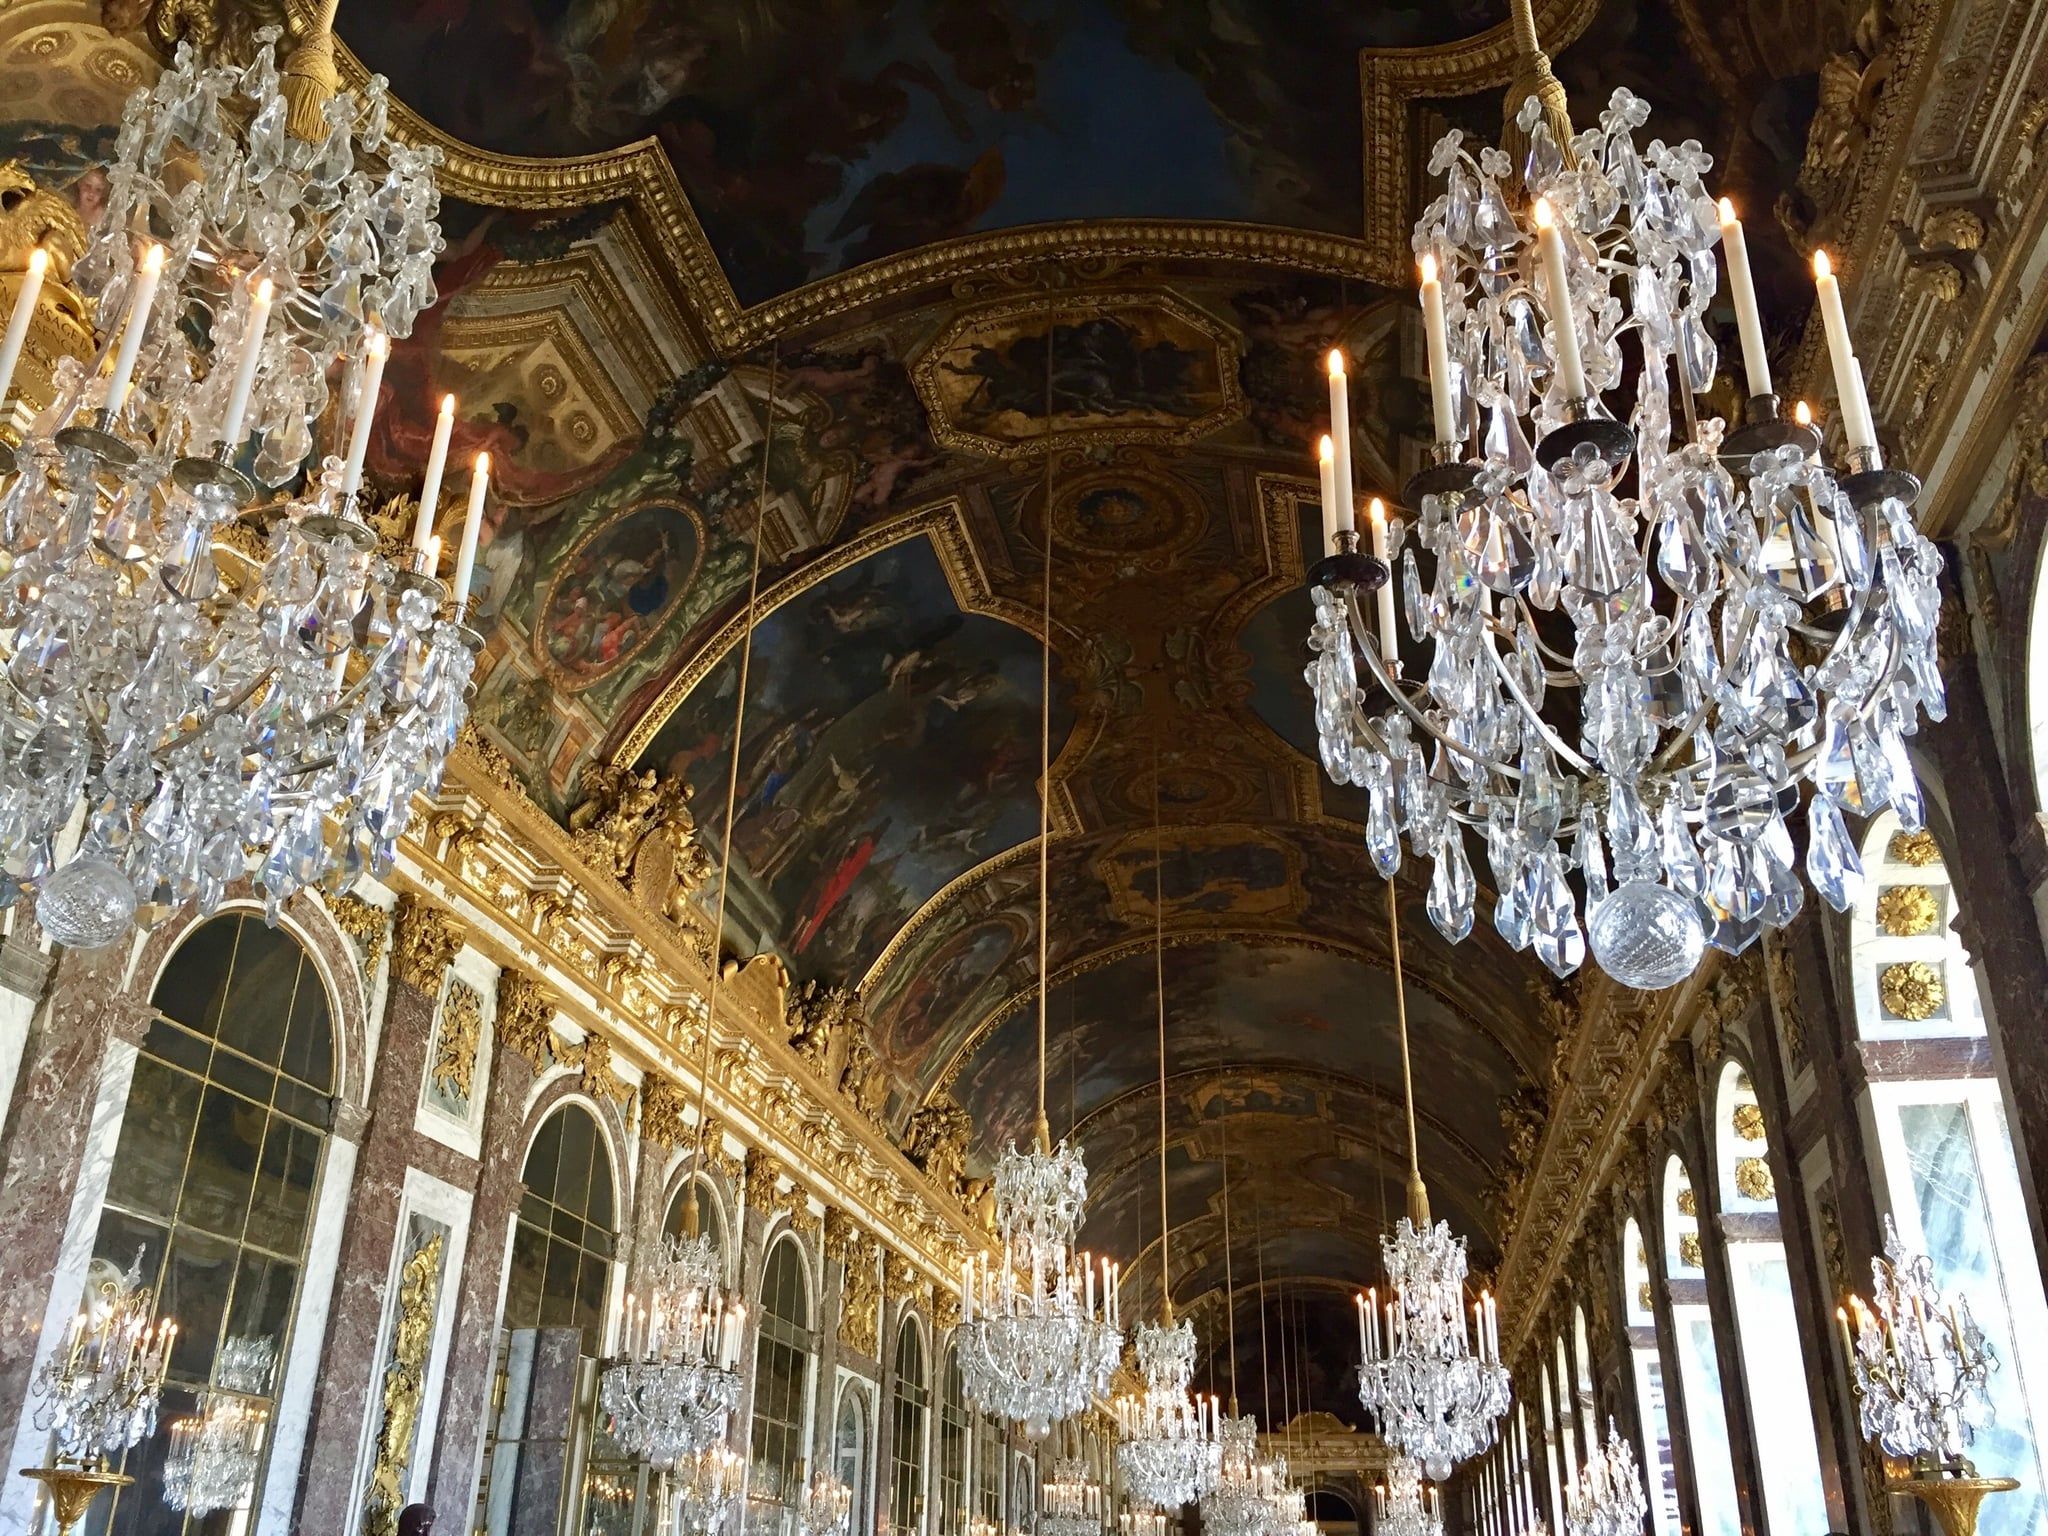 The Hall of Mirrors at Versailles, with its chandeliers and mirrors, was a grand space. - Royalcore